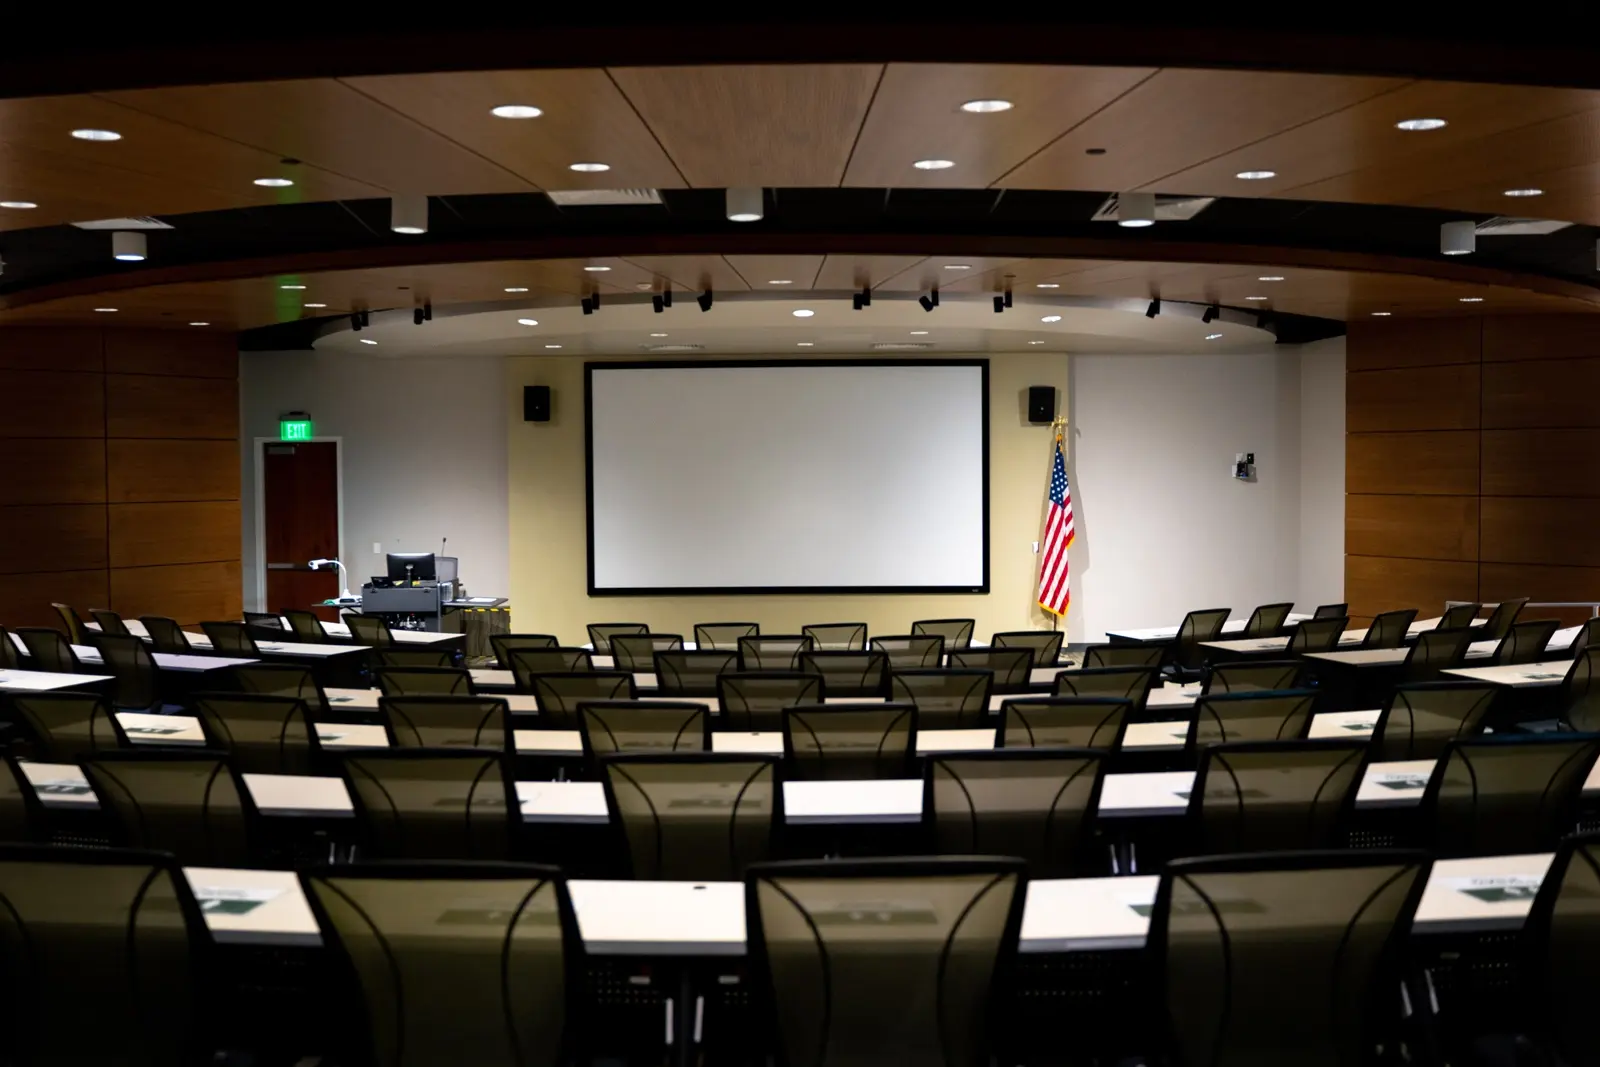 CAMLS A modern, empty lecture hall with rows of black chairs and white desks facing a large projection screen. The room features wooden paneling, ceiling lights, and an American flag standing to the side of the screen. A podium and equipment are also at the front.